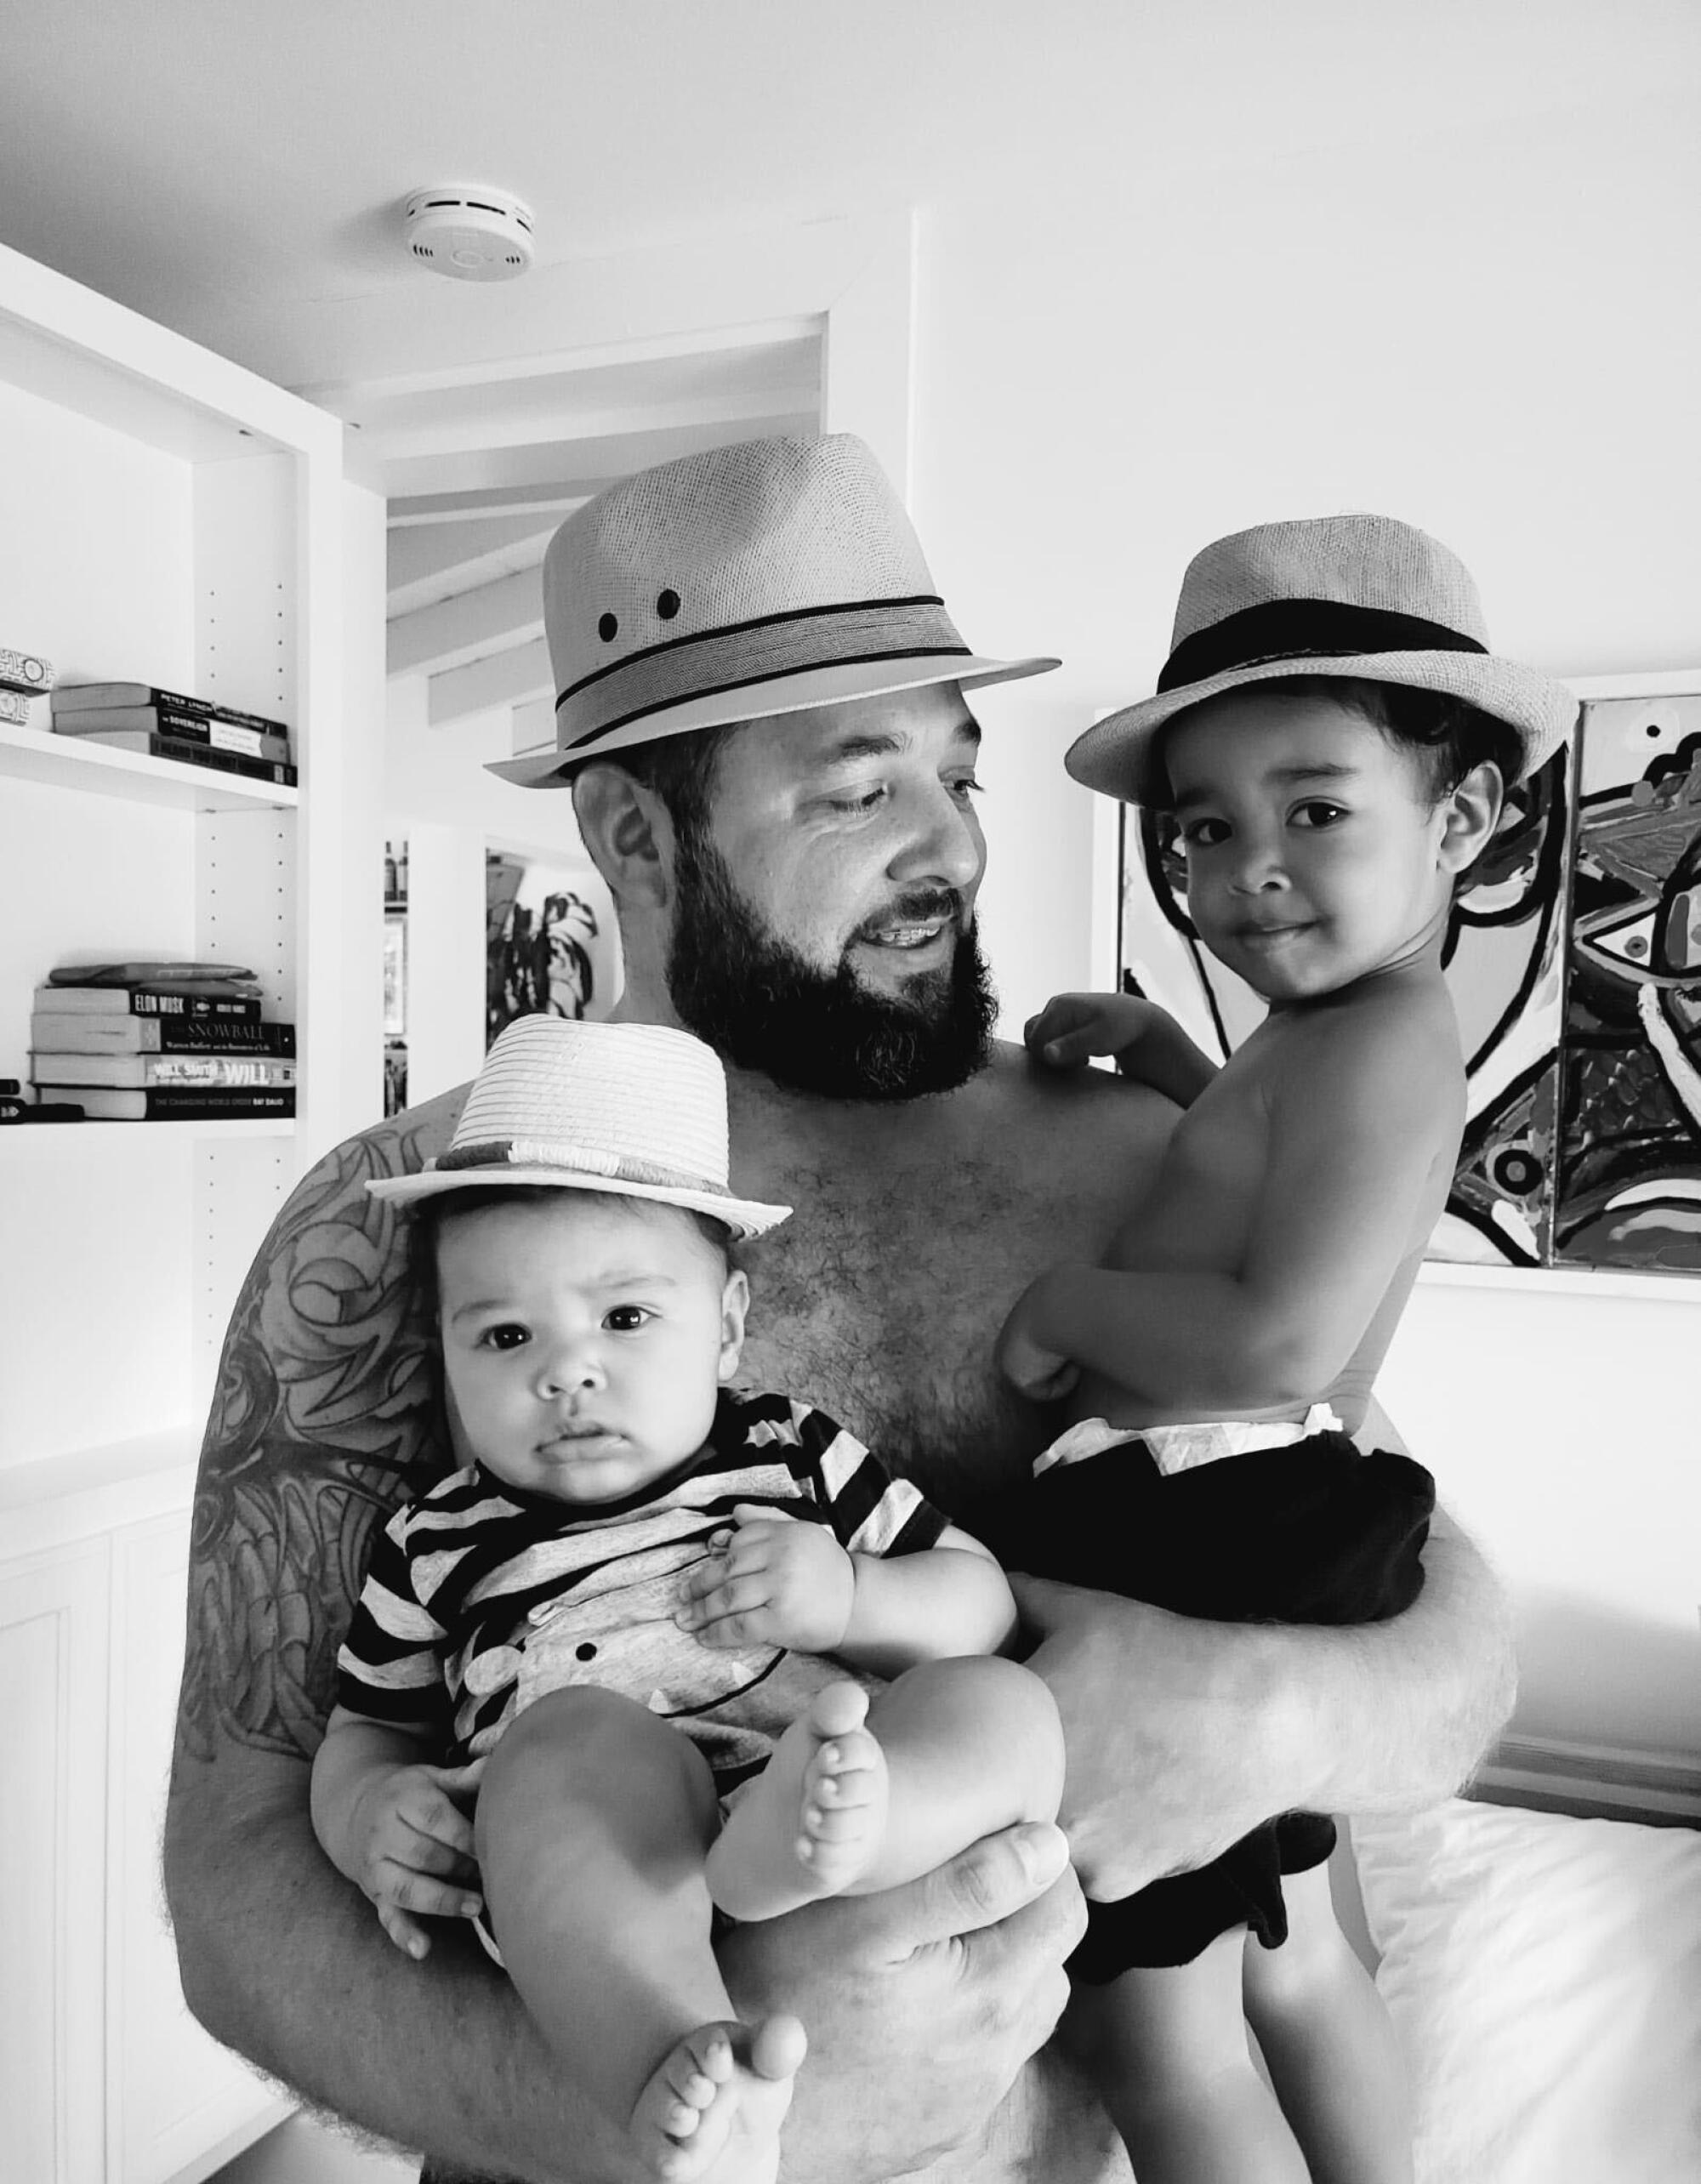 Jesse Saenz holds his sons Enso, right, and Airo. They are wearing hats.